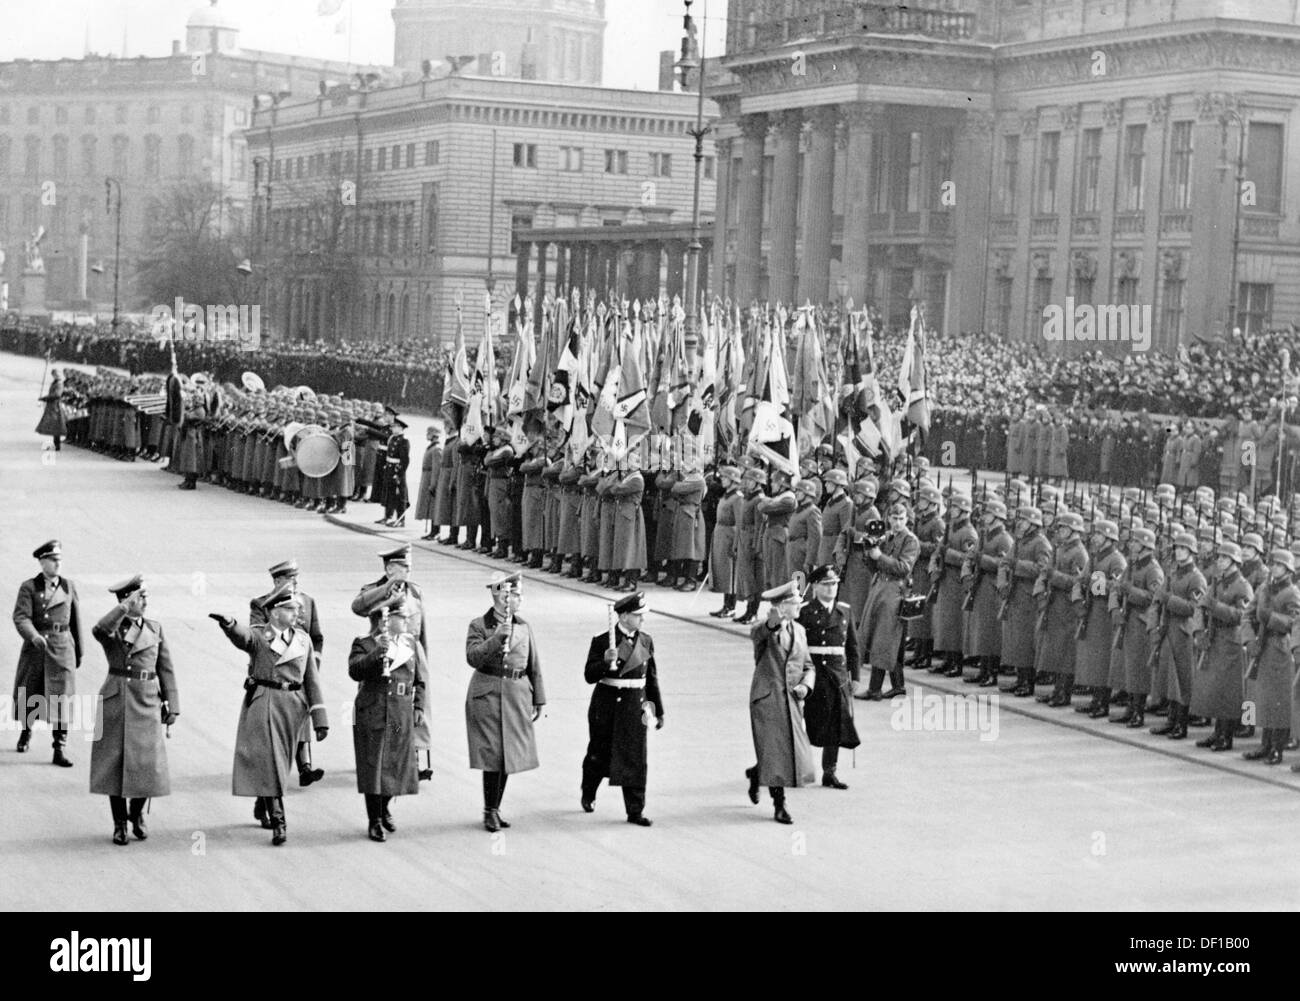 The image from the Nazi Propaganda shows Adolf Hitler walking past an honorary company after the ceremony in the yard of the Zeughaus in Berlin, Germany, on the occasion of the Heldengedenktag (Day of Commemoration of Heroes) on 15 March 1942. To Hitler's left: Admiral Erich Raeder (black uniform), next to him Field Marshal Wilhelm Keitel and Field Marshal Erhard Milch. In the background (l-r), view of the Berliner Stadtschloss, Alte Kommandantur, and Kronprinzenpalais. Fotoarchiv für Zeitgeschichte Stock Photo